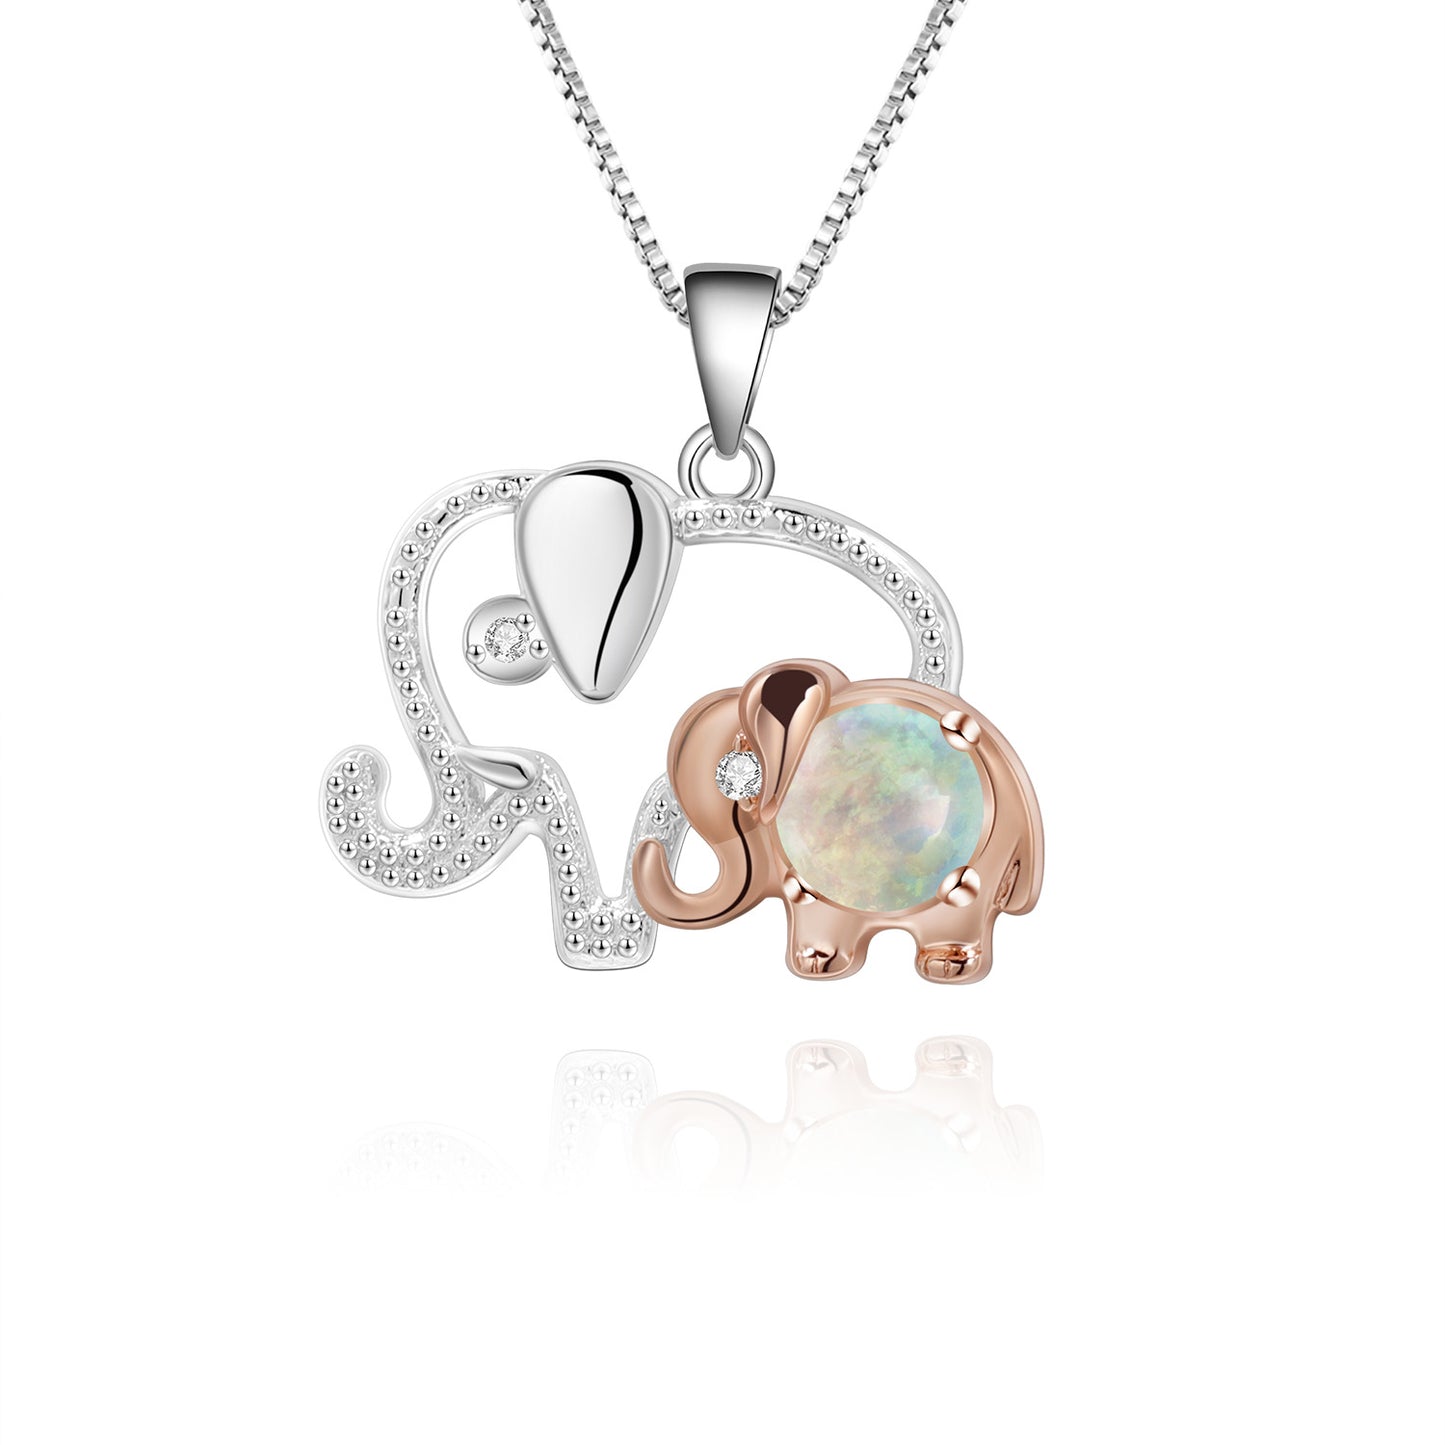 Mother's Day Gift Light Luxury Fashion Design with Colourful Gemstone Mother and Baby Elephant Pendant Sterling Silver Necklace for Women